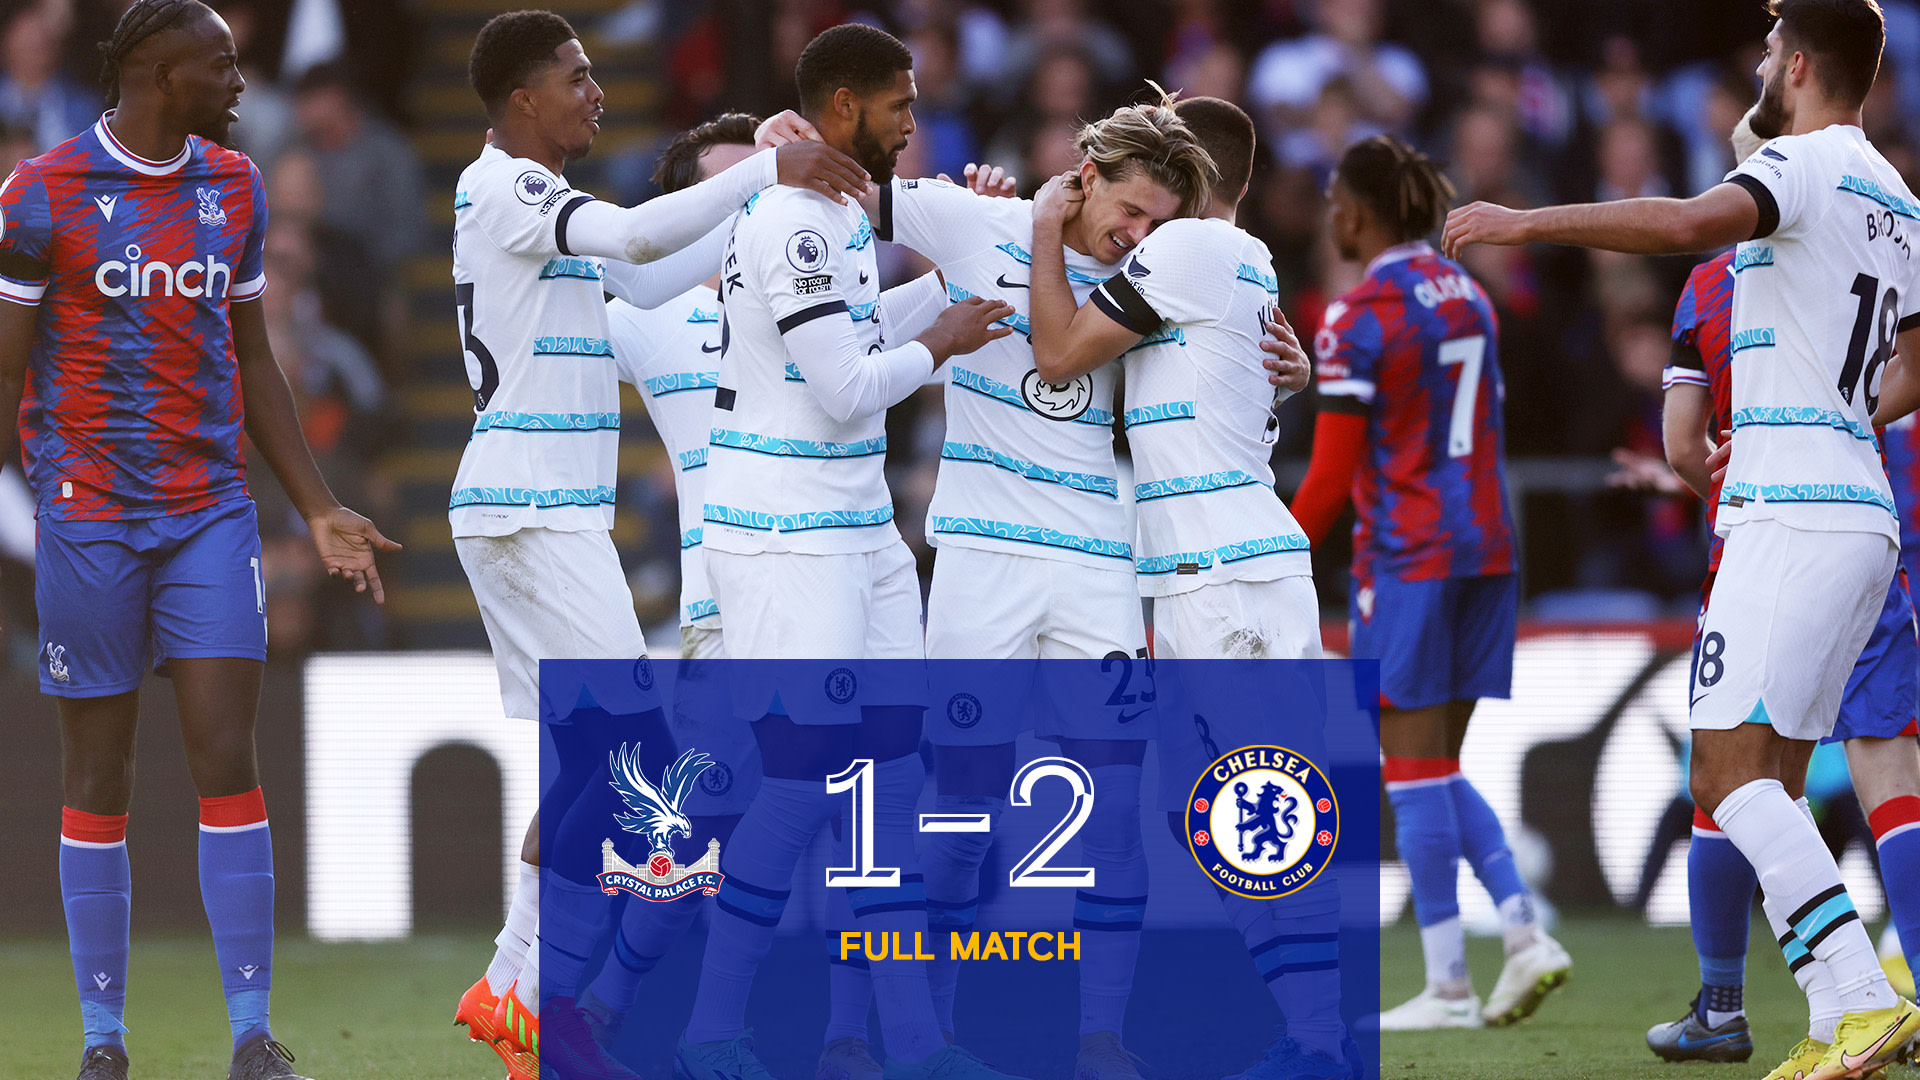 Crystal Palace 1 2 Chelsea Premier League Full Match Video Official Site Chelsea